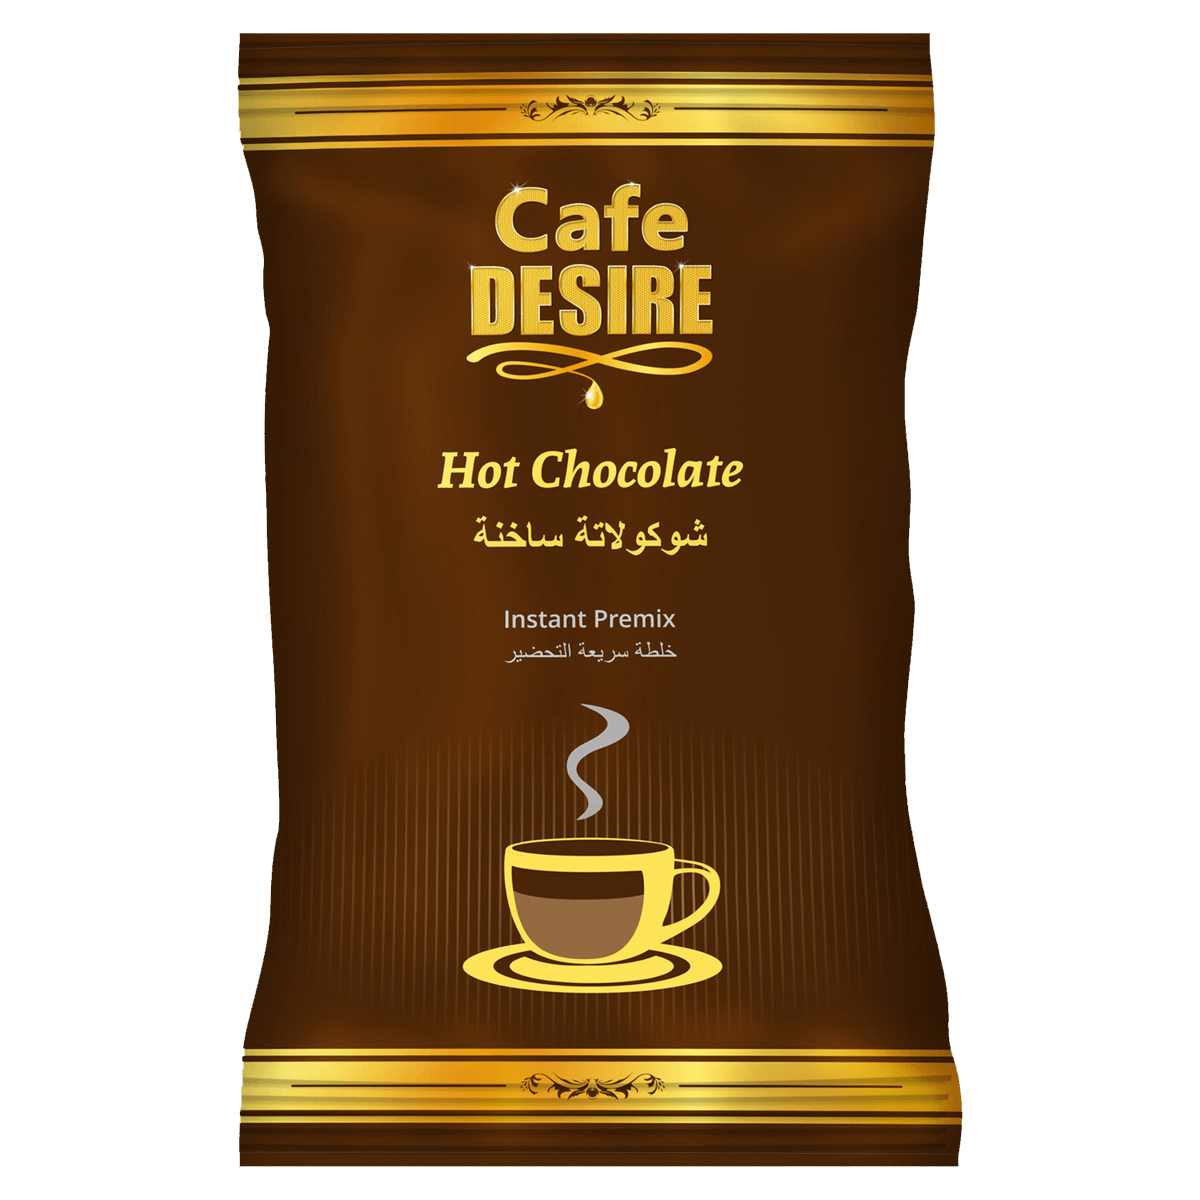 Hot Chocolate Premix (1Kg) | Makes 80 Cups | Milk not required | Premium Cocoa Powder, Drinking Chocolate | For Manual Use - Just add Hot Water | Suitable for all Vending Machines - Cafe Desire Cafe Desire Cafe Desire Hot Chocolate Premix (1Kg) | Makes 80 Cups | Milk not required | Premium Cocoa Powder, Drinking Chocolate | For Manual Use - Just add Hot Water | Suitable for all Vending Machines